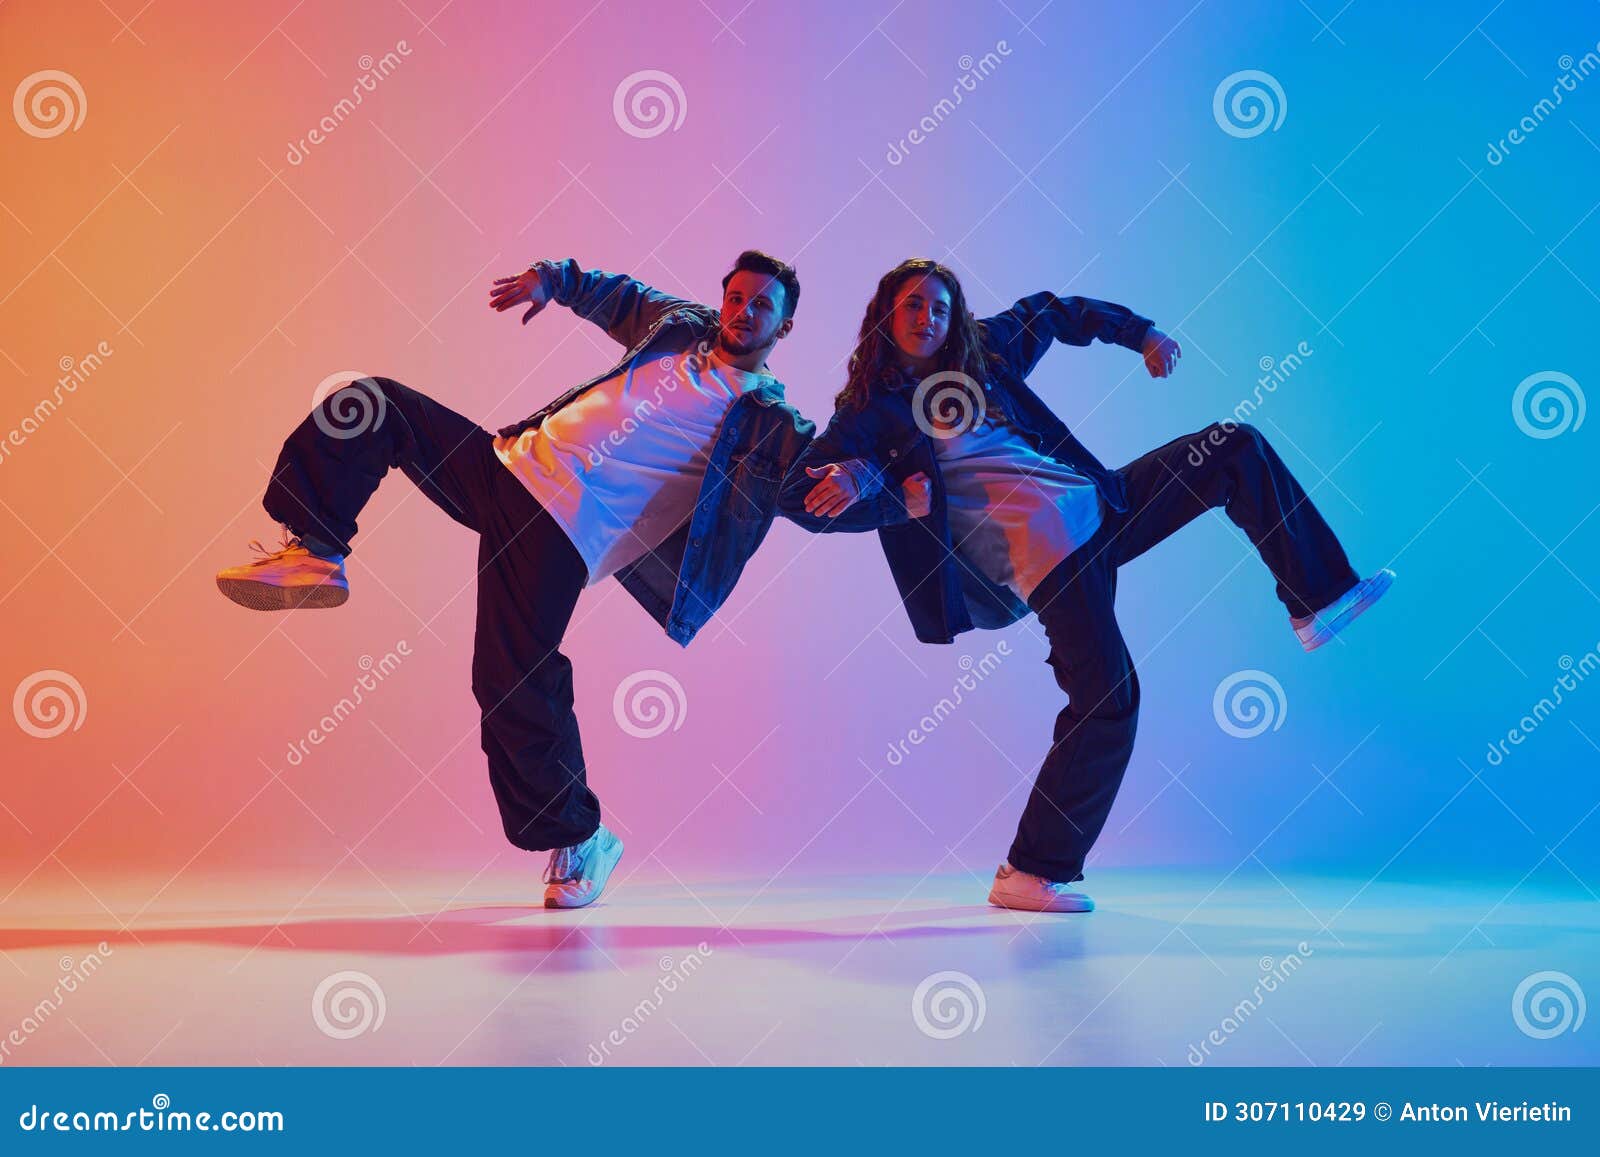 Athletic Dance Duo Poses Against Blank White Background Photo And Picture  For Free Download - Pngtree